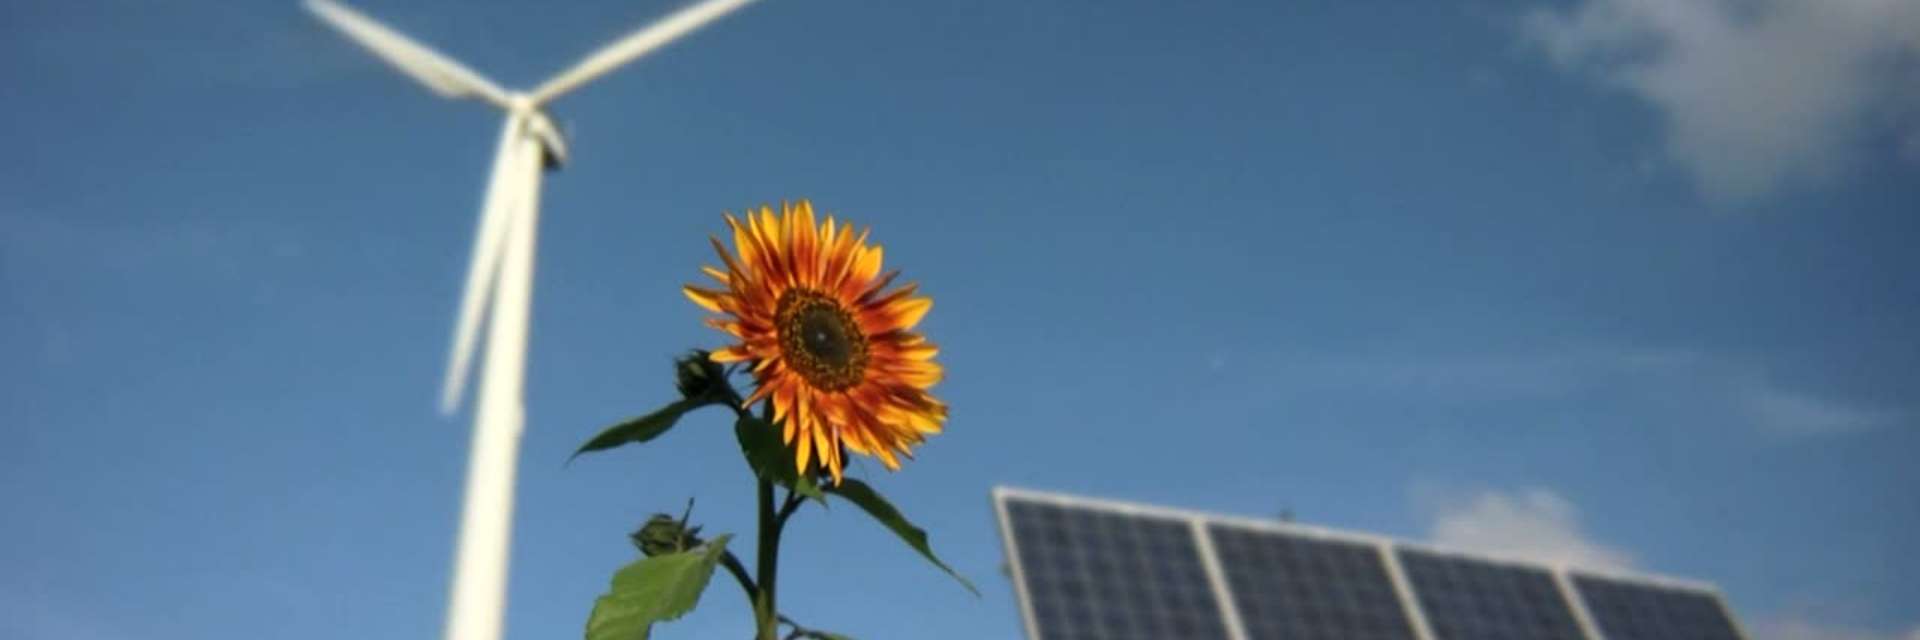 Sunflower with solar panels